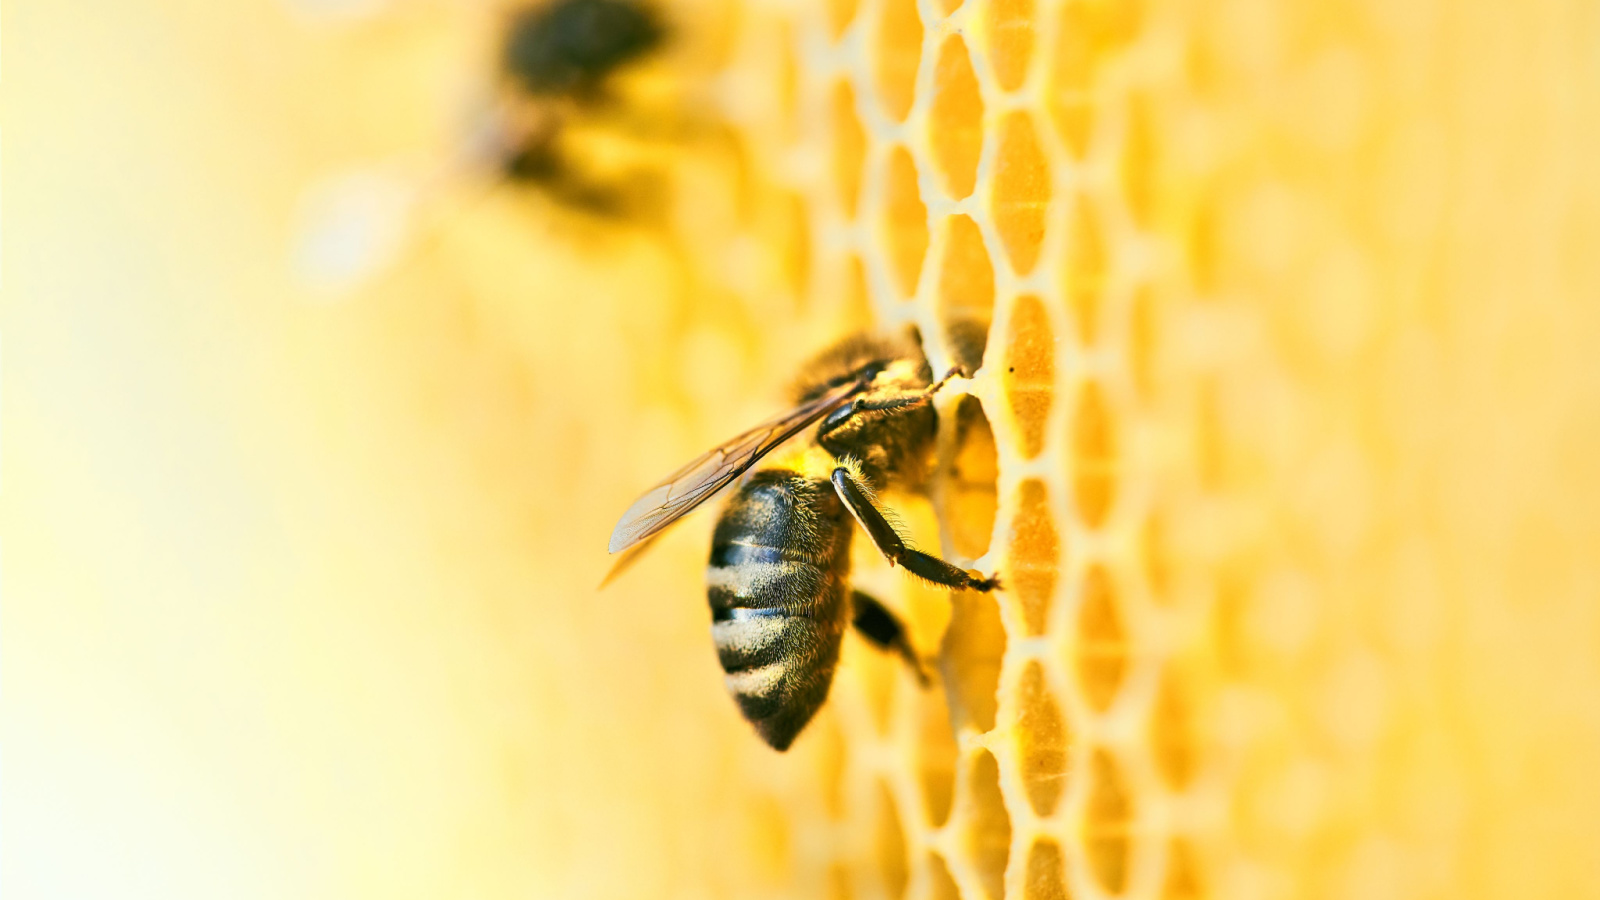 Getting Down to Bees-ness with the Girl Scouts | St. Louis Personal Injury Lawyers